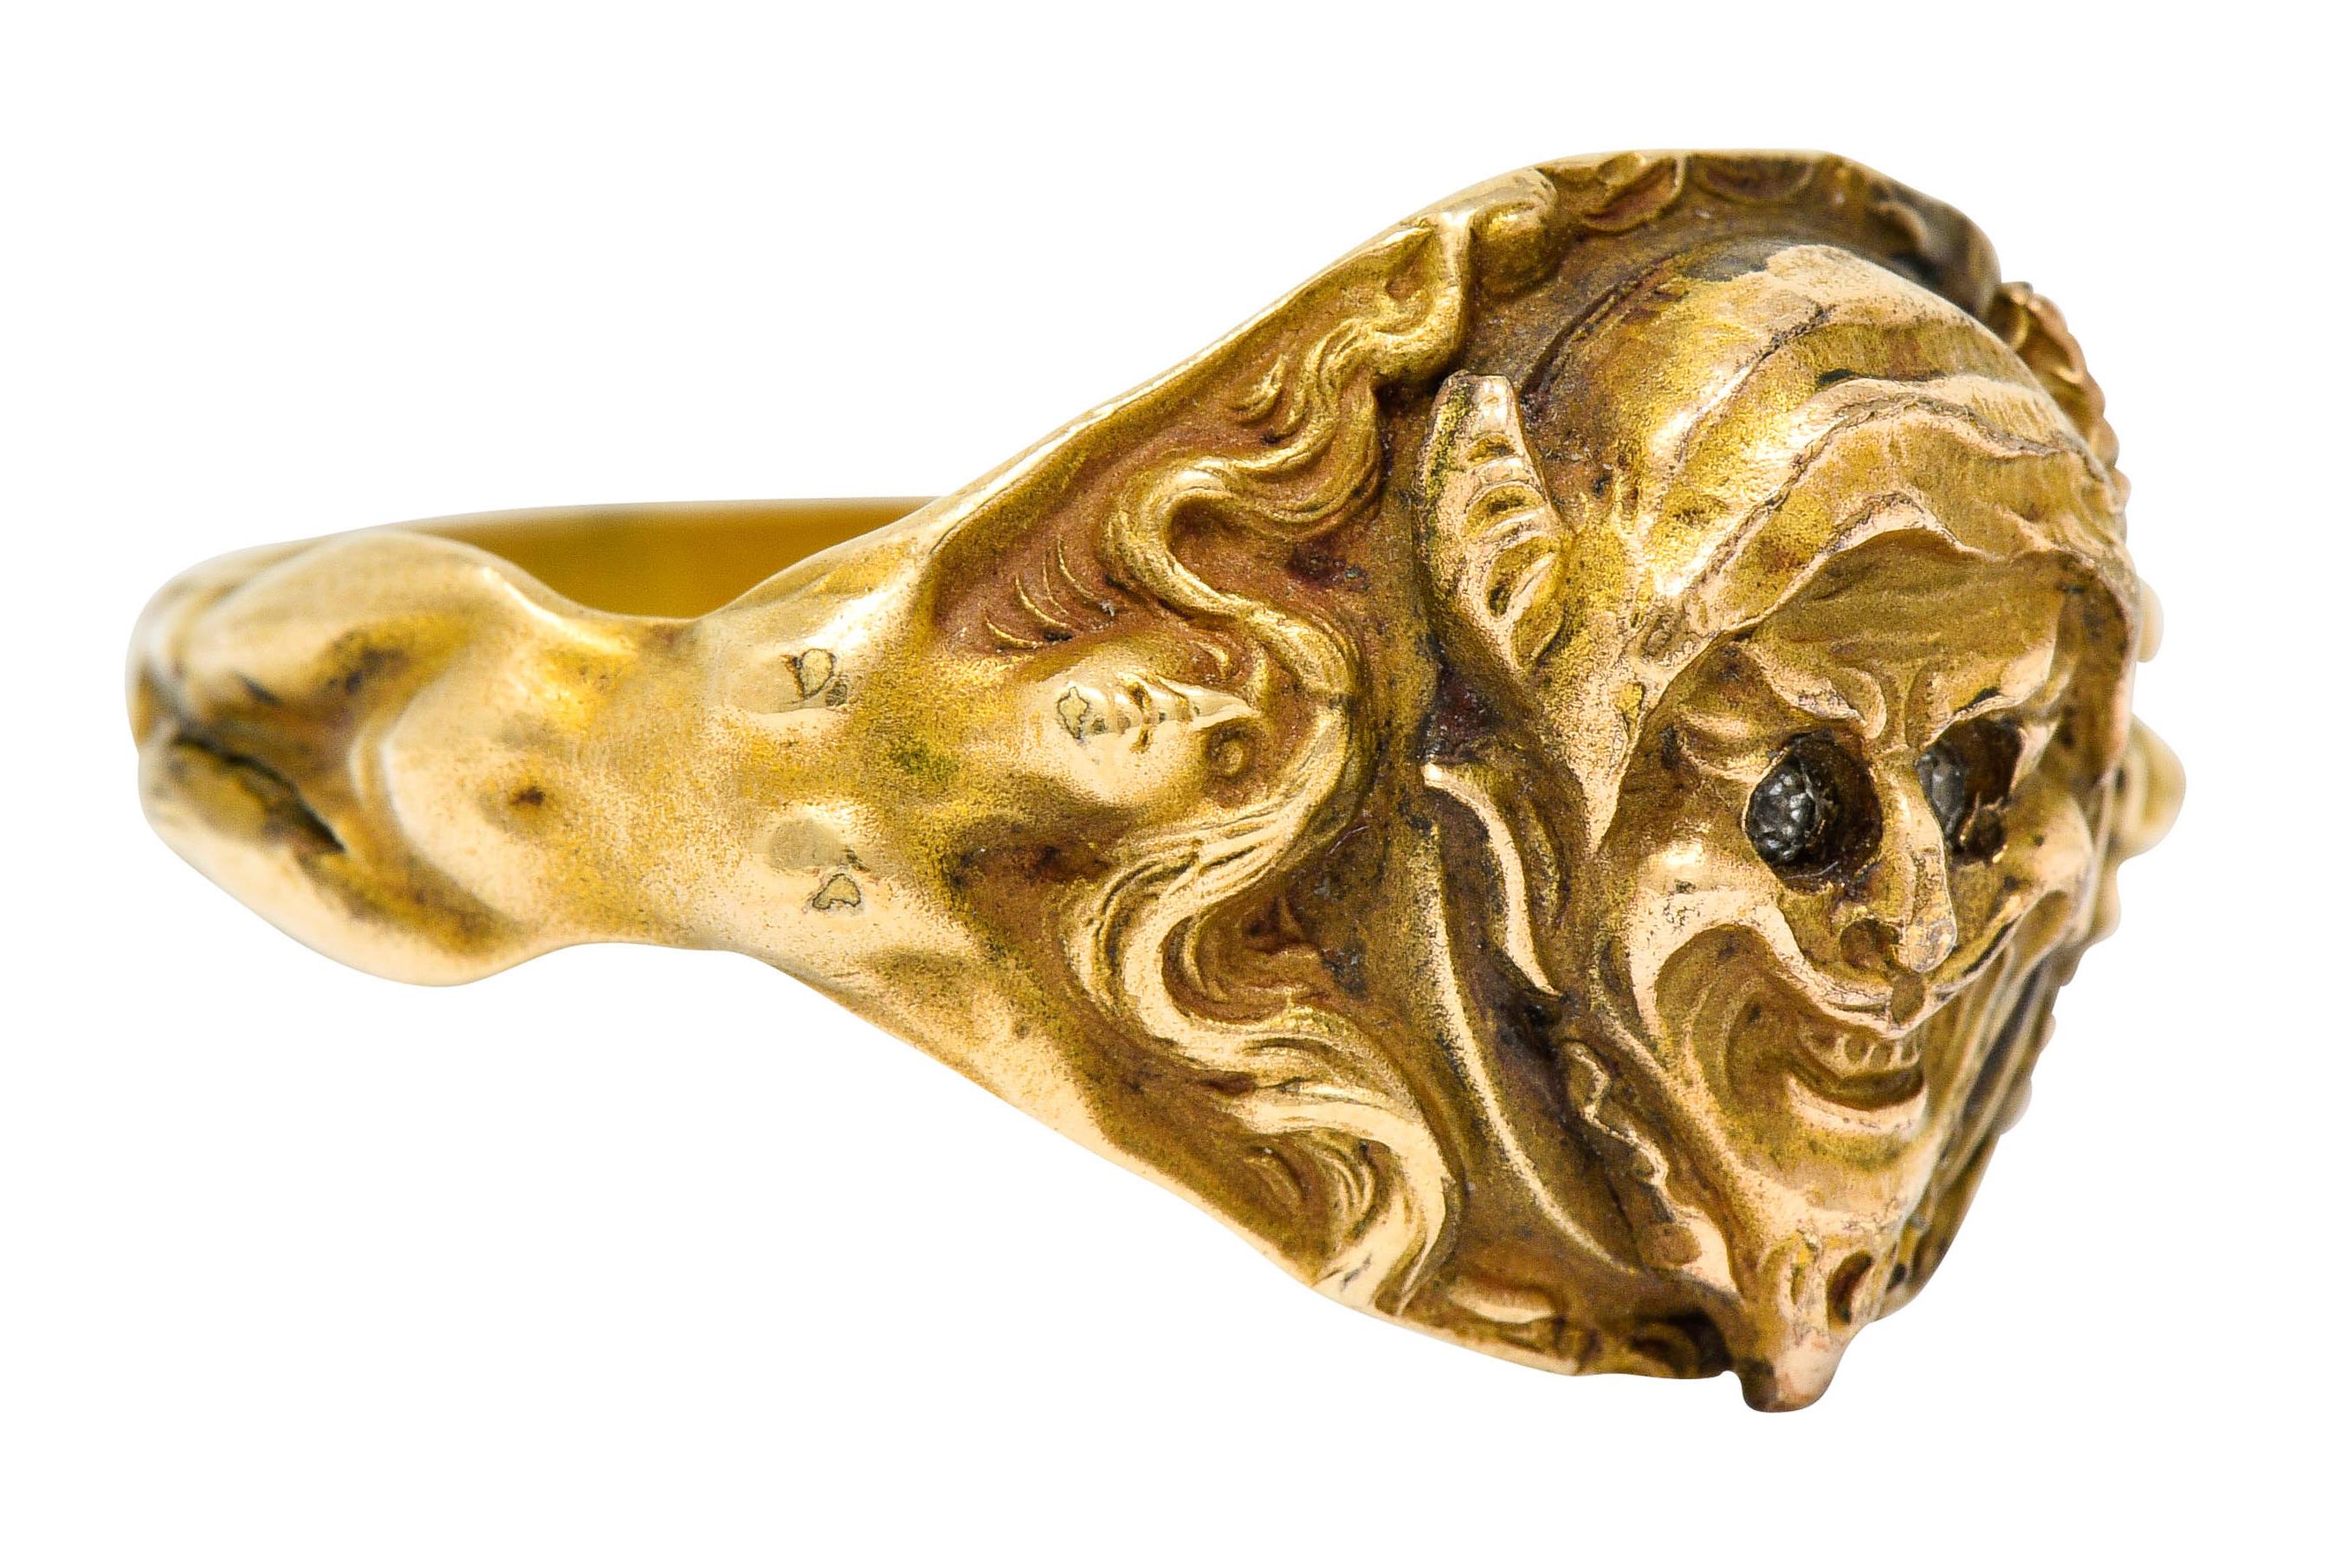 Band style ring depicting a grimacing devilish face, hooded and with horns, incredibly detailed

Eyes are accented by paste gemstones, glittering and white

Shoulders are comprised of two female figures with open arms and windswept hair

With